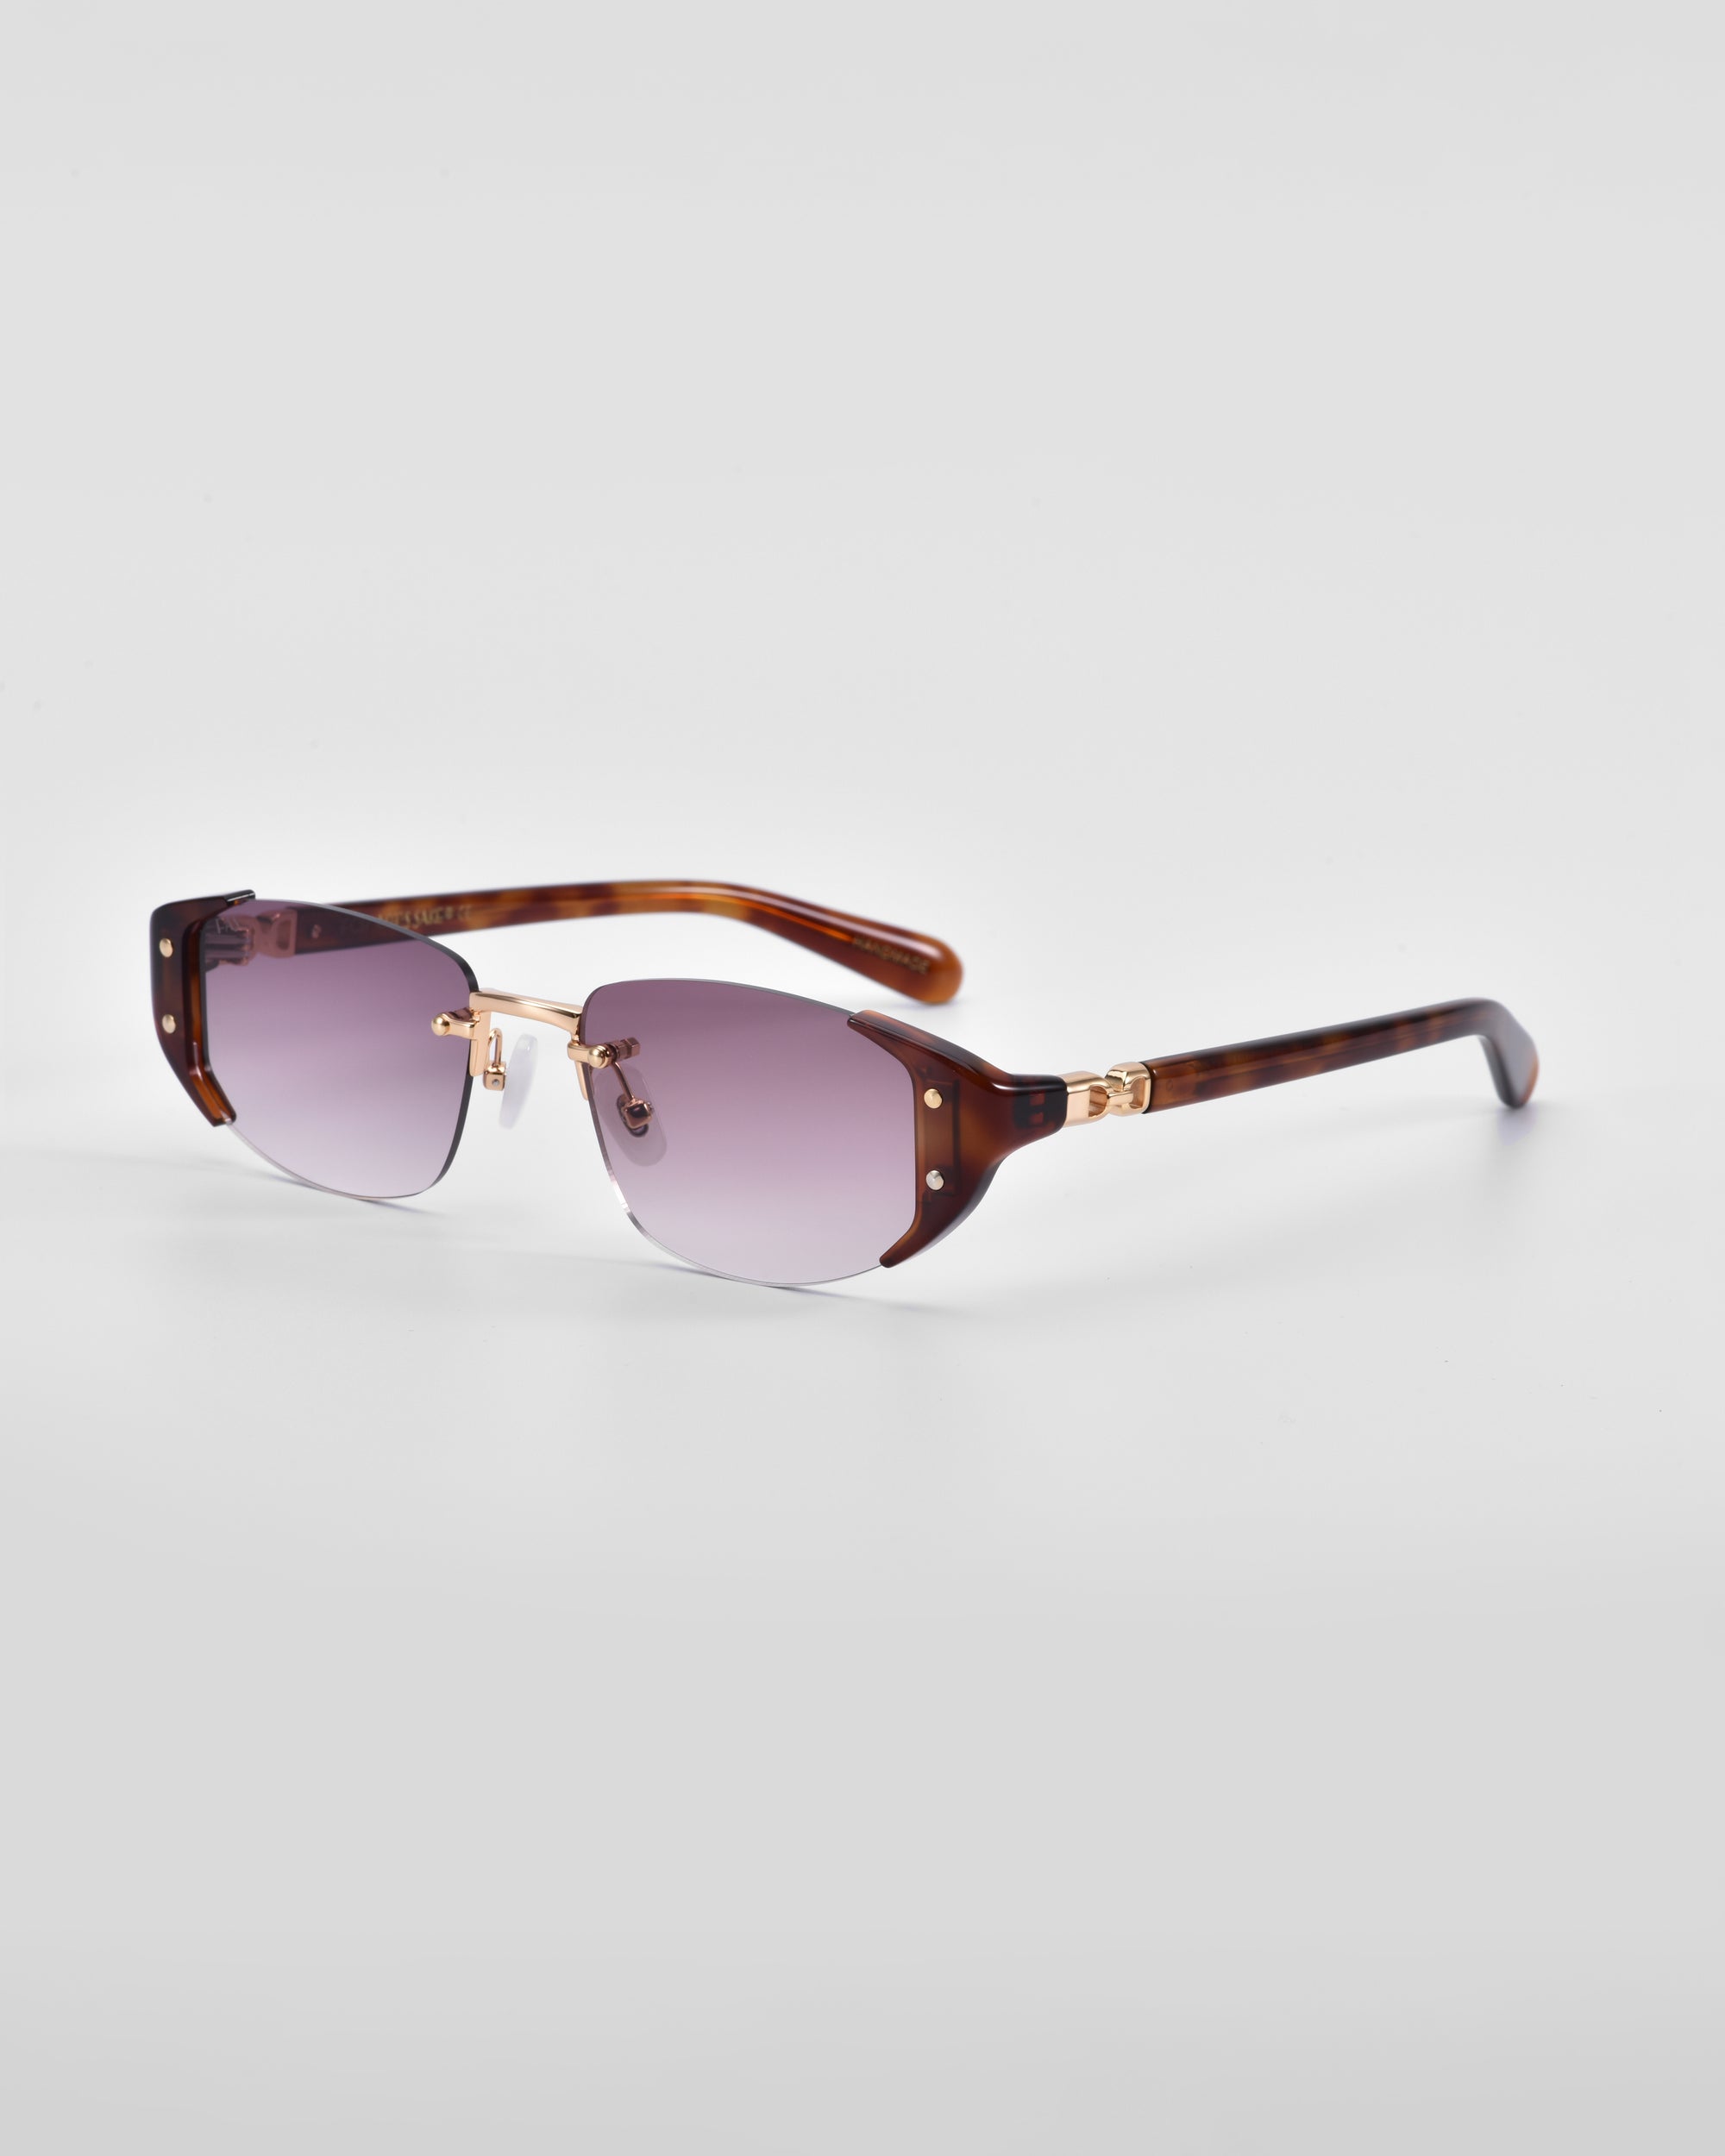 The For Art&#39;s Sake® Harbour sunglasses boast a retro-inspired design with gradient lenses shading from purple to clear. The tortoiseshell-patterned frames feature 18 karat gold plating accents, and the lenses are partially rimless with the top rim matching the tortoiseshell design. The look is both sleek and modern.